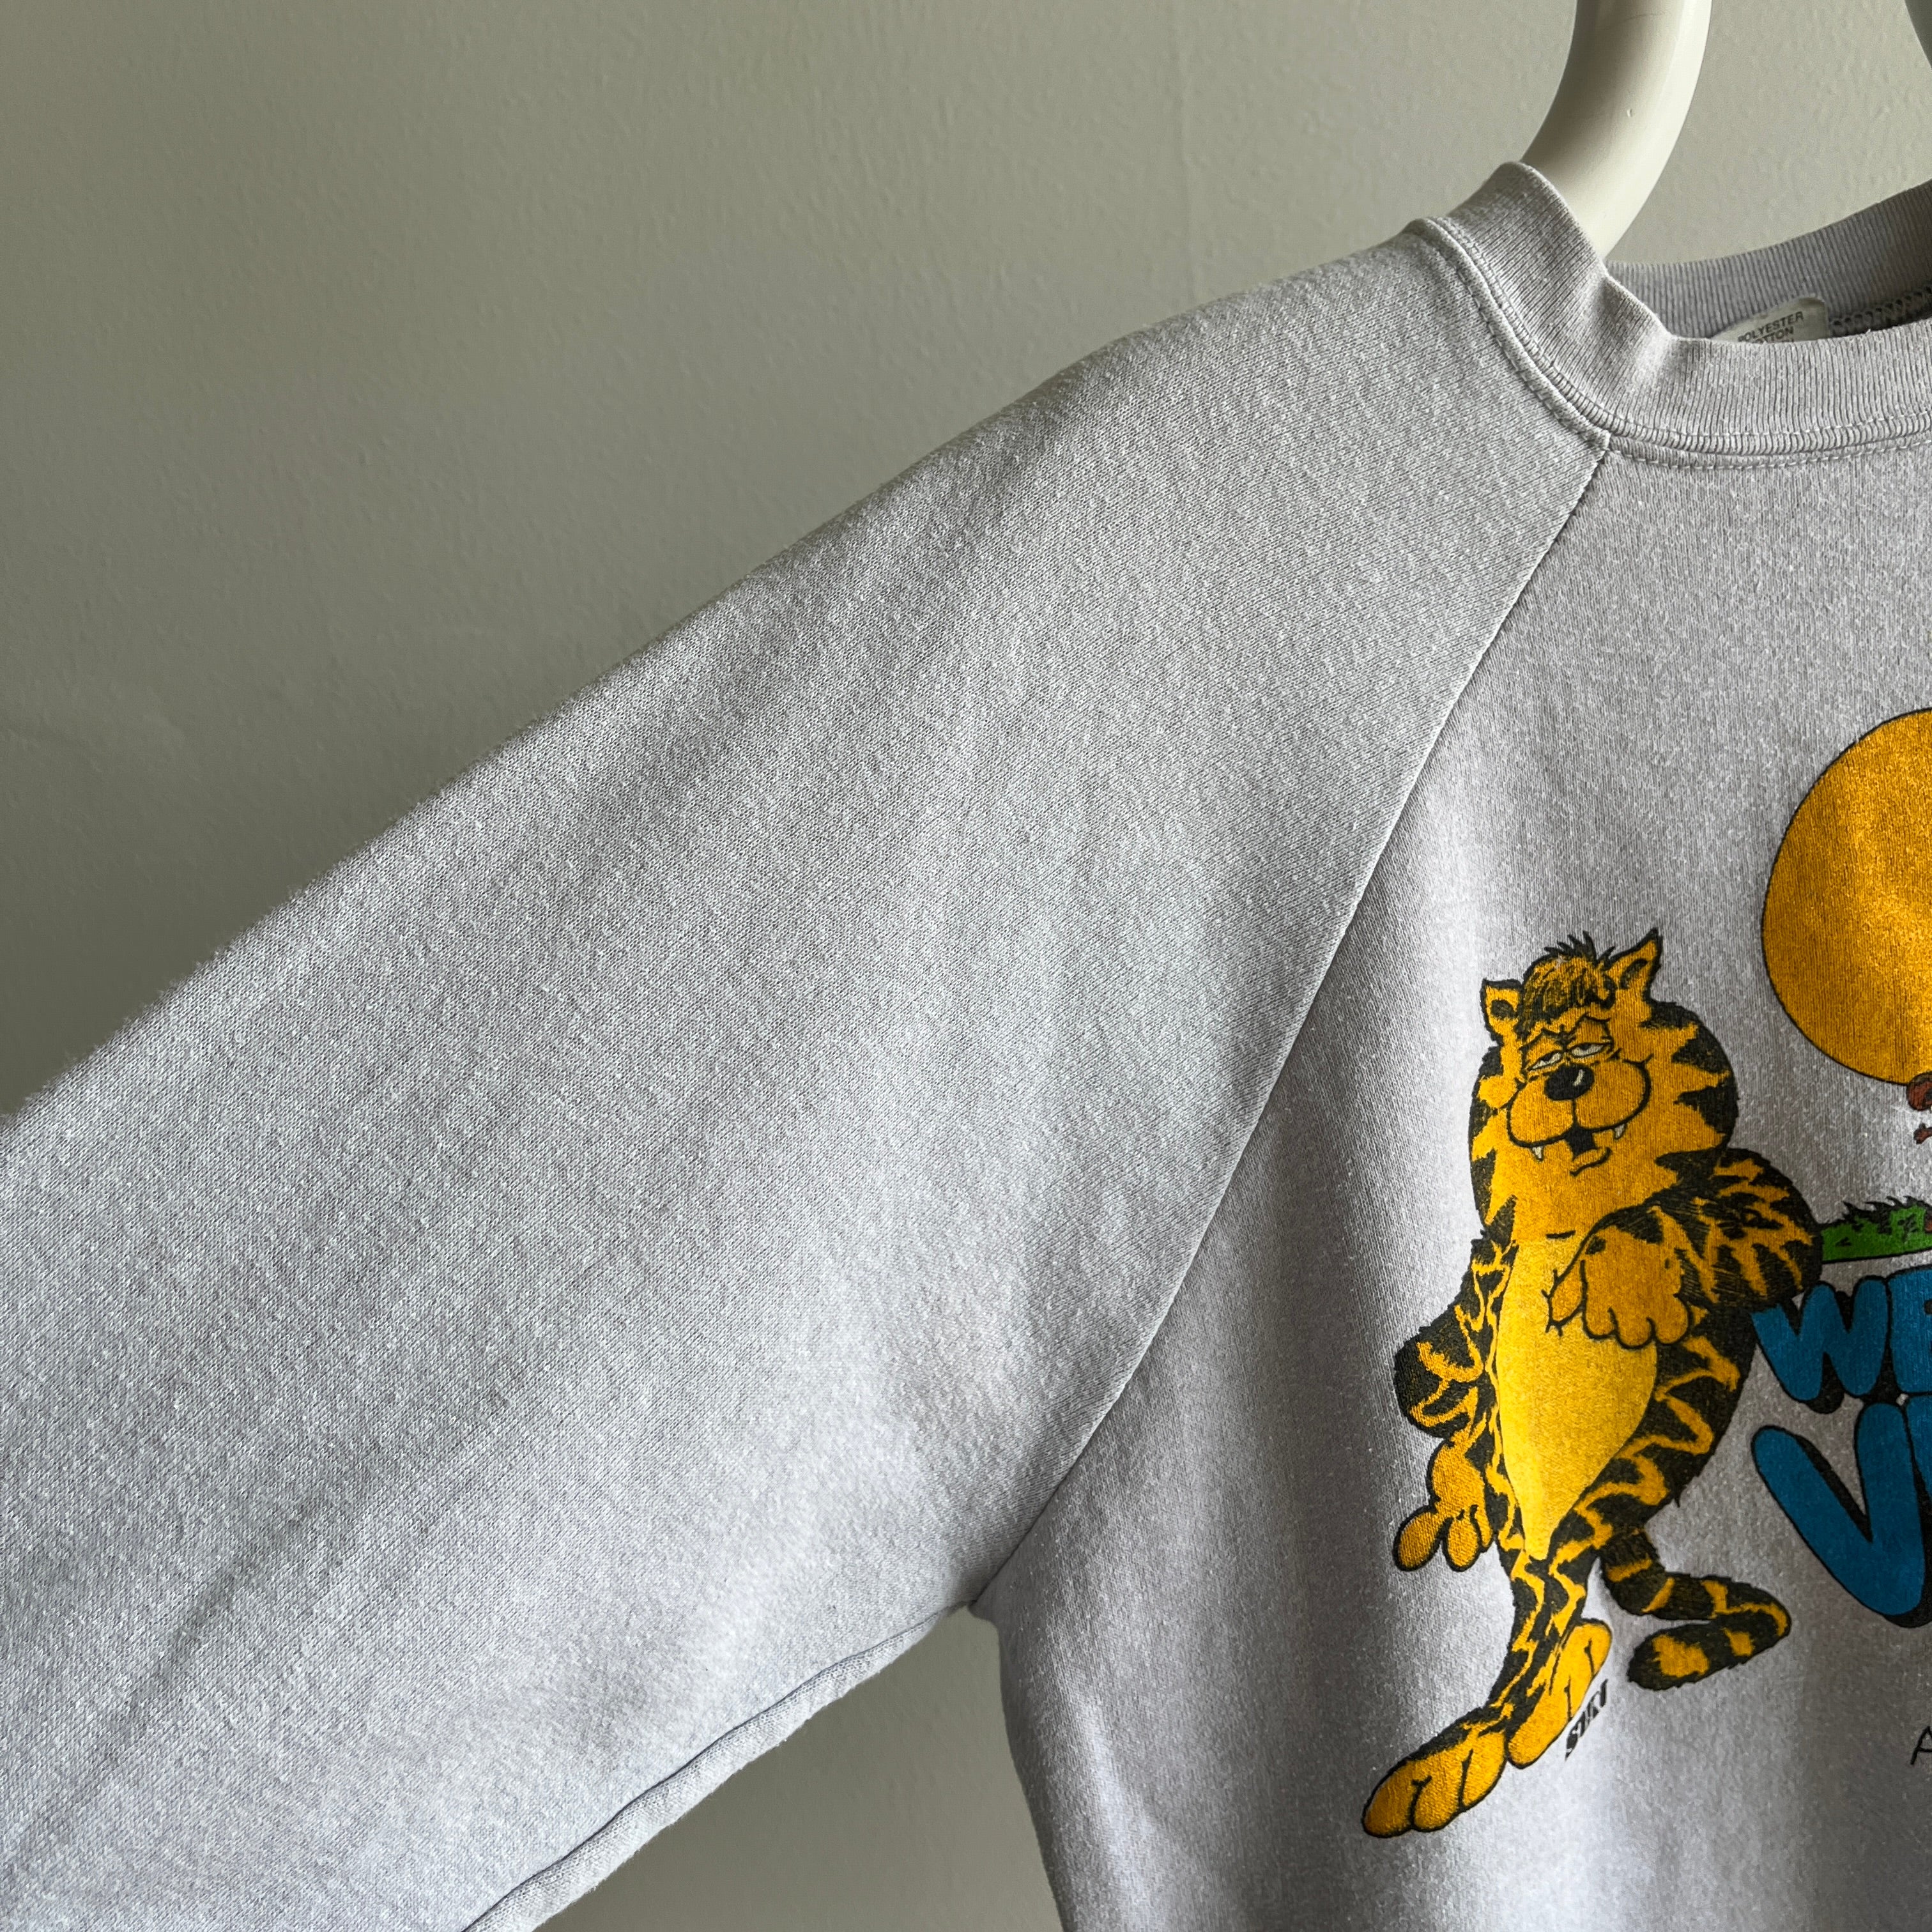 1980s West Virginia and Proud of It Sweatshirt - WOWOWOW